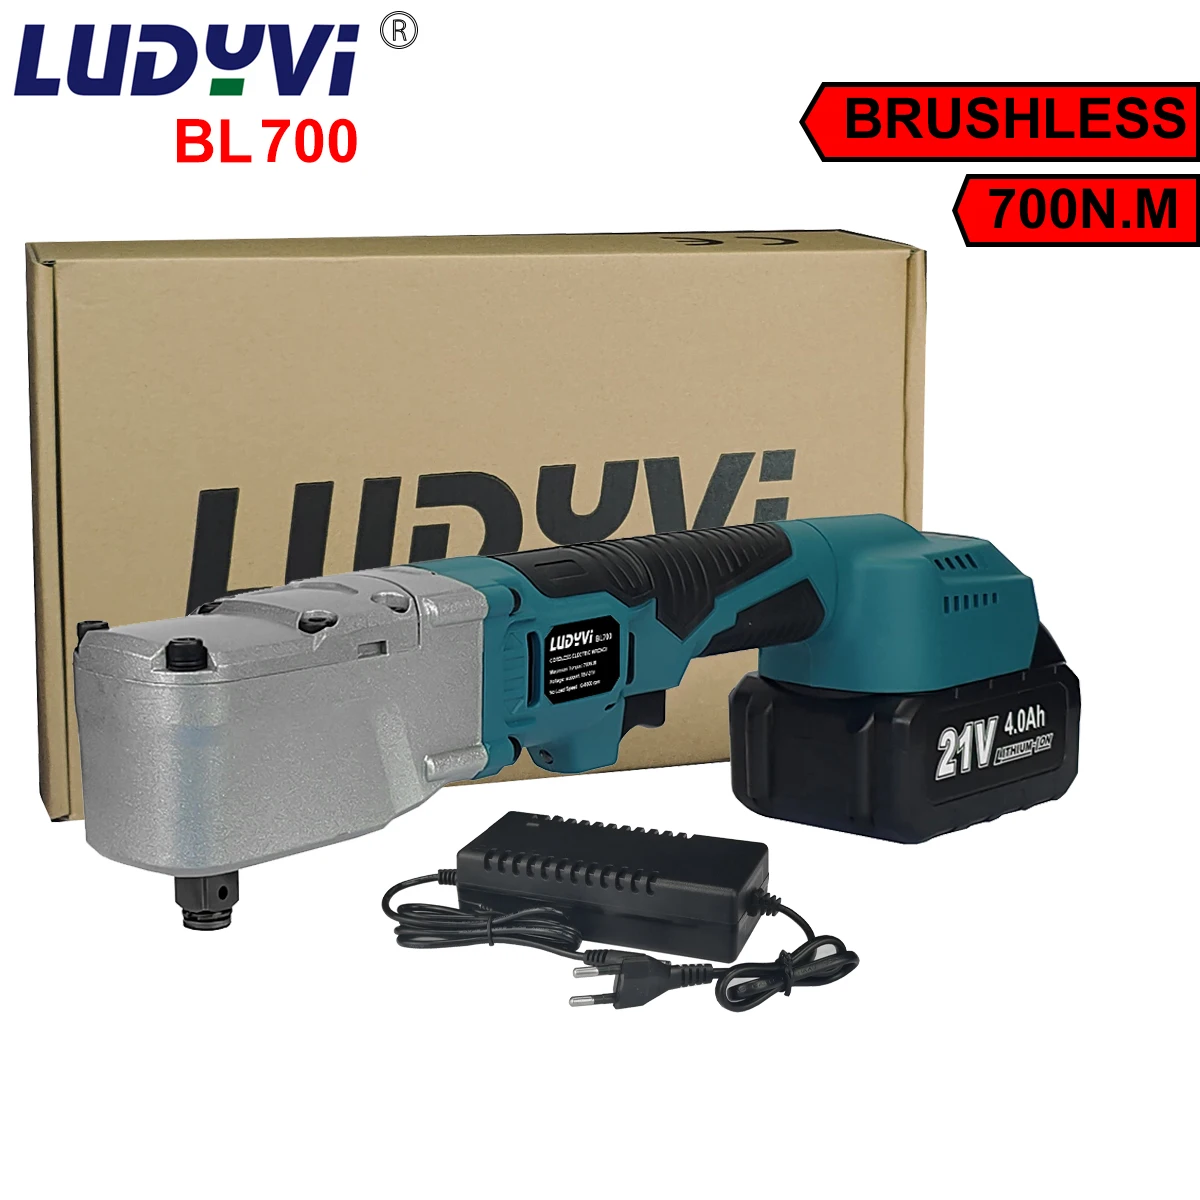 Brushless electric wrench 700N.M 90 degree right angle power tool can be used to repair the car with dismantling screws and nuts toaiot voron v0 3d printer project fasteners screws nuts full kit v0 3d printer screws full kit